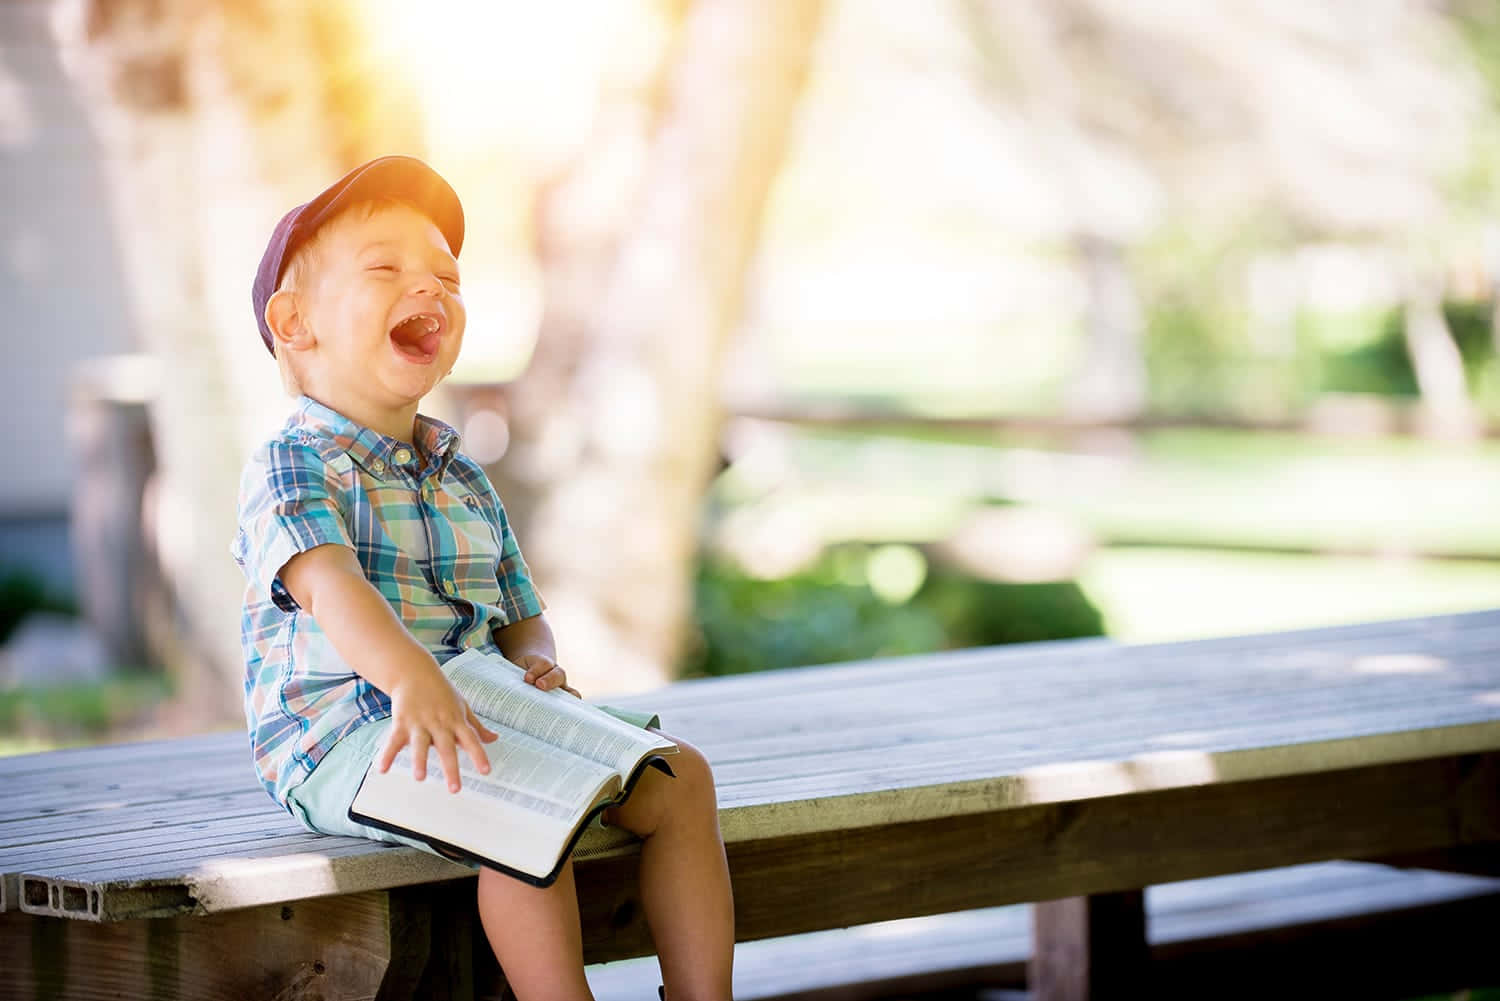 A Boy Is Laughing While Sitting On A Bench